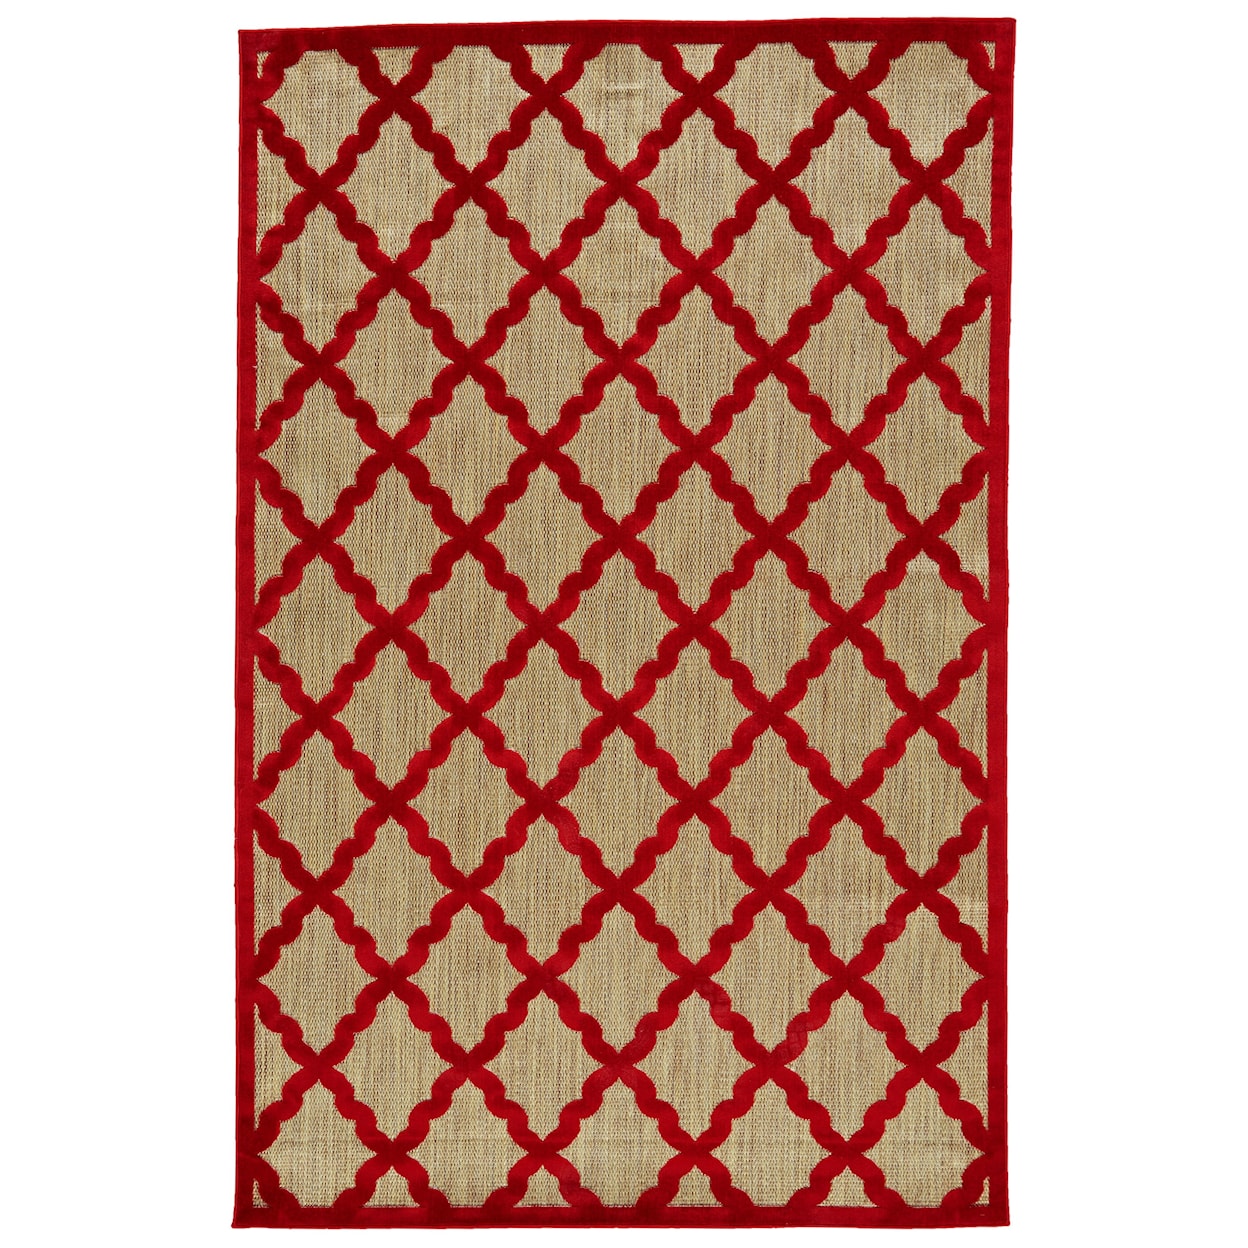 Feizy Rugs Raphia I Tan/Red 5' X 7'-6" Area Rug